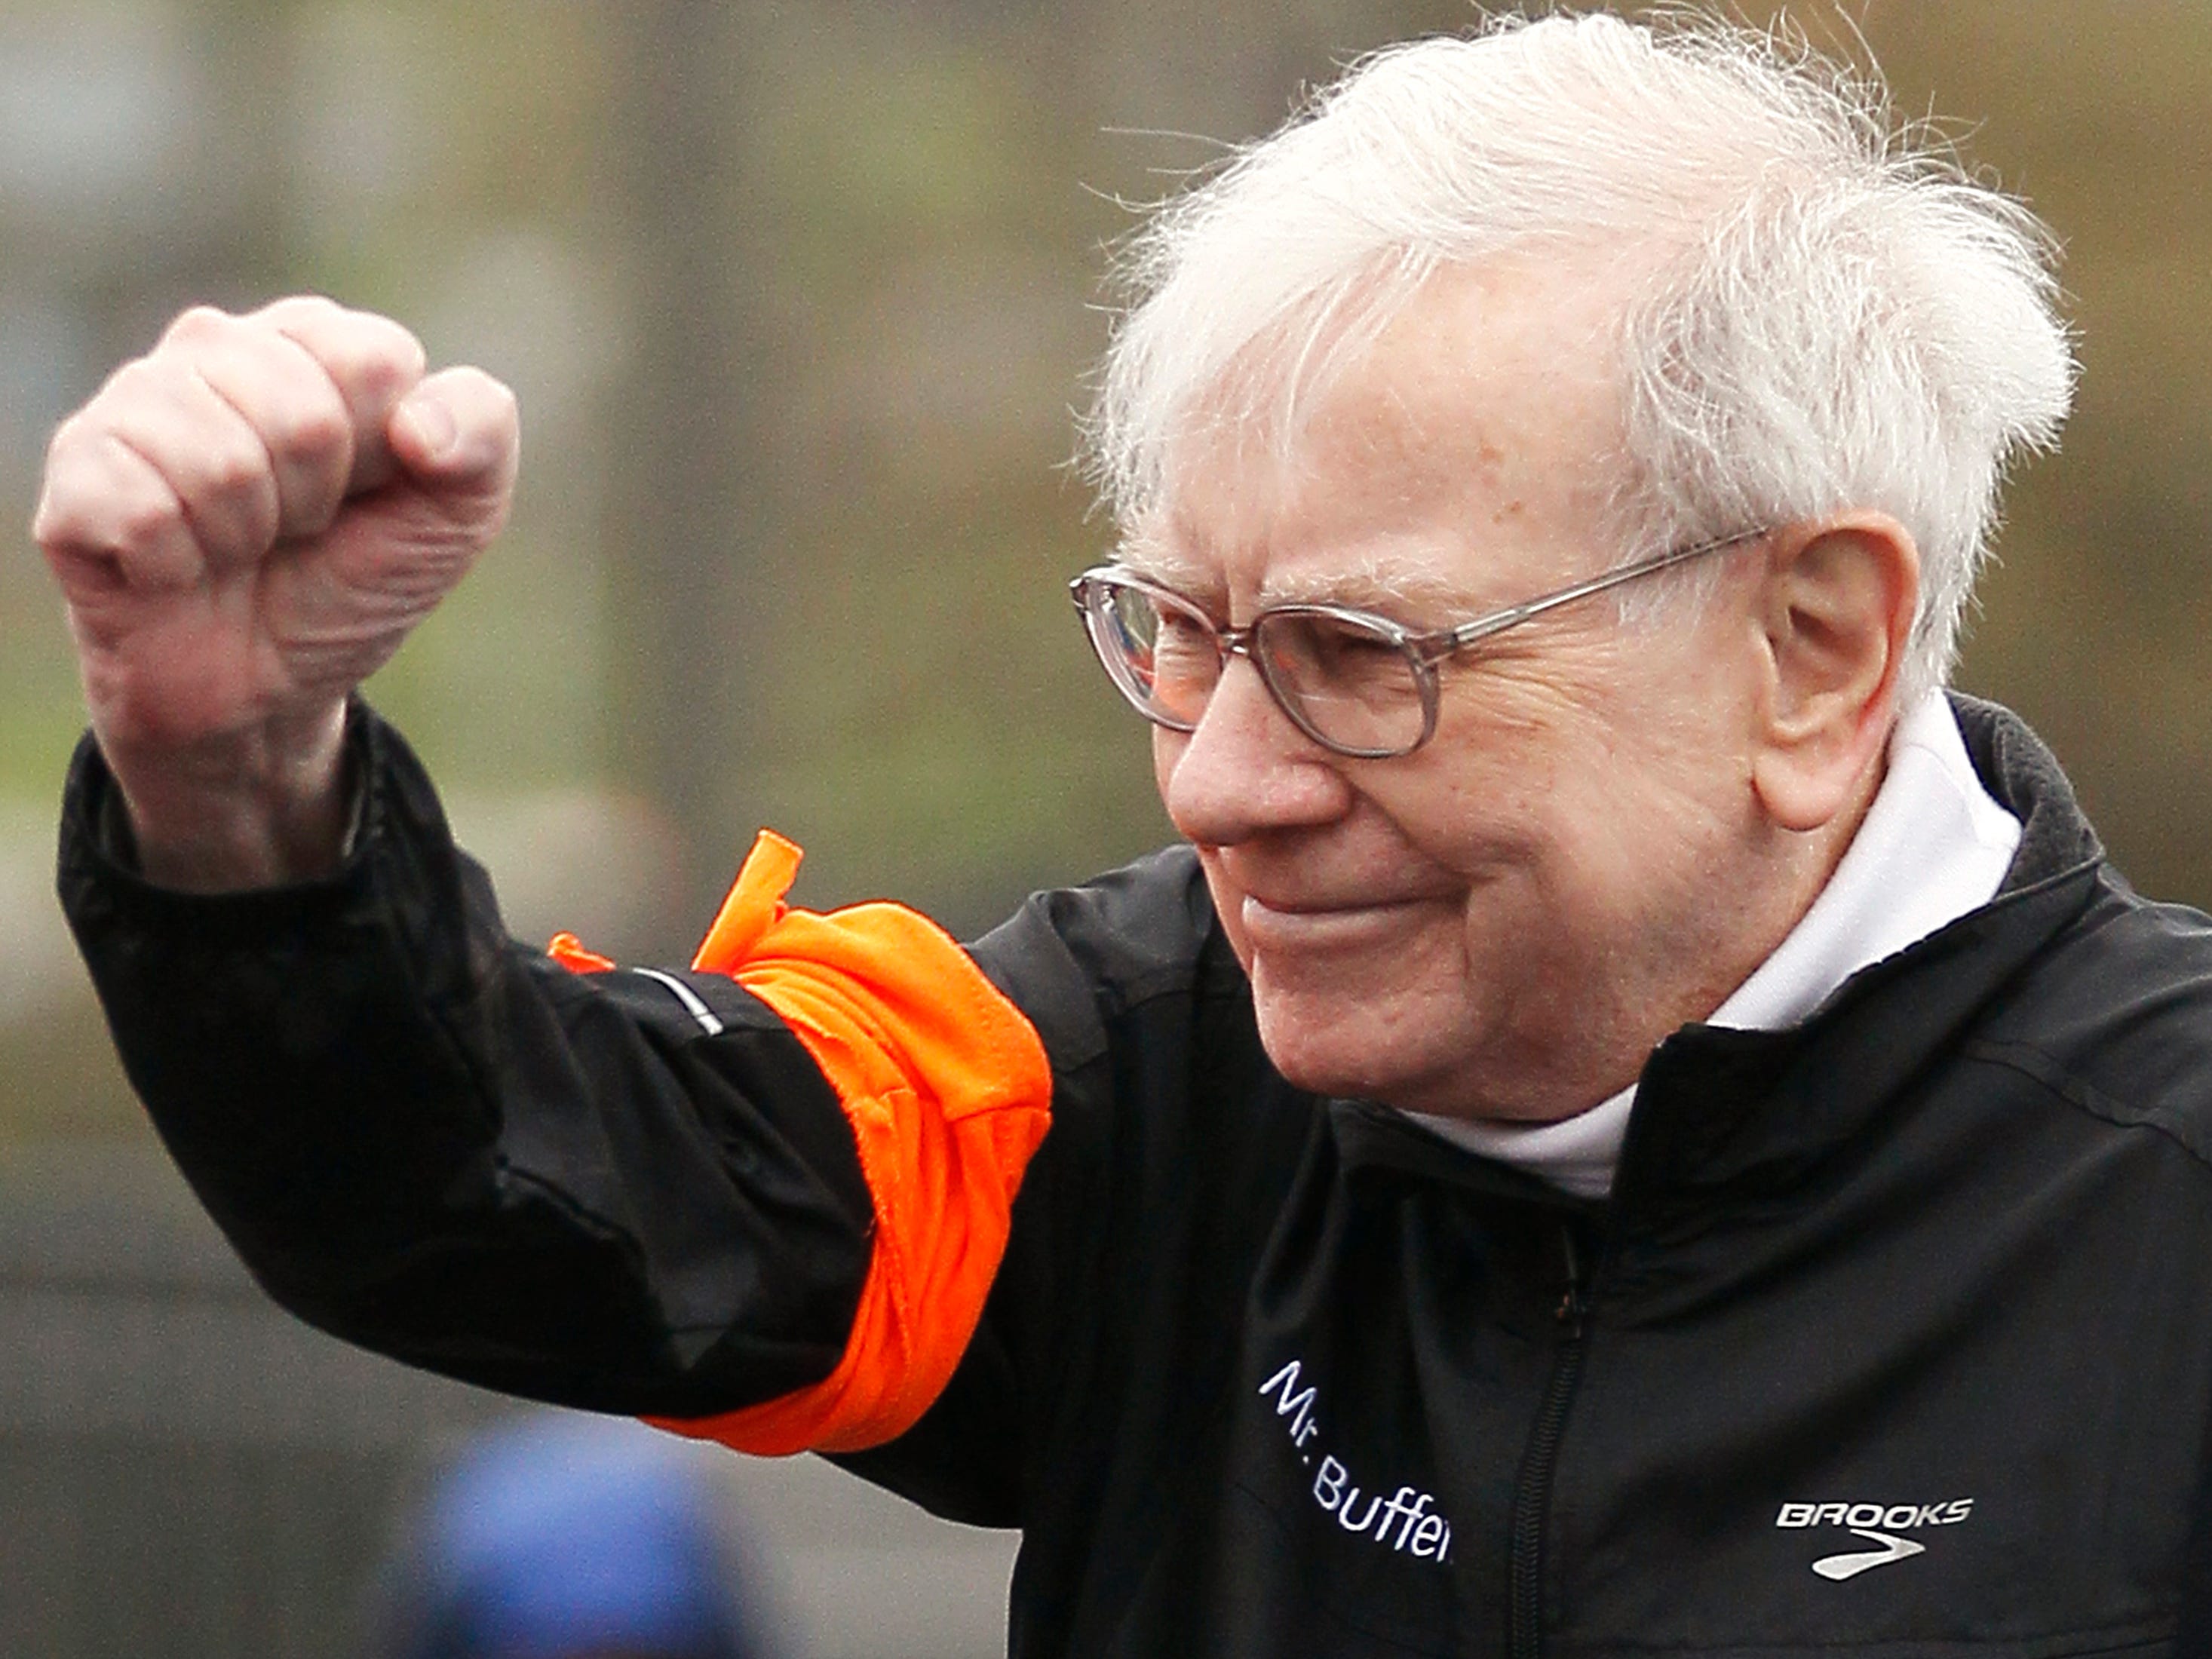 <p>Warren Buffett is considered one of the world's most generous philanthropists. He <a href="https://www.berkshirehathaway.com/donate/webdonat.html" rel="noopener">pledged</a> in 2006 to donate about 85% of his nearly 475,000 Berkshire Class A shares to five foundations: the Bill & Melinda Gates Foundation, the Susan Thompson Buffett Foundation (named for his late wife), and three foundations run by his three children.</p><p>He teamed up with Bill and Melinda Gates in 2010 to form The Giving Pledge, an initiative that asks the world's wealthiest people to dedicate the majority of their wealth to philanthropy. Buffett himself has <a href="https://givingpledge.org/pledger?pledgerId=177" rel="noopener">pledged</a> that 99% of his wealth will go to philanthropy during his lifetime or upon his death.</p><p>As of 2023, the shares he's already given away were worth about $50 billion based on their value at the time of donation, or about $130 billion given Berkshire Hathaway's current stock value. If Buffett had kept those shares rather than donating them, he'd likely be the <a href="https://markets.businessinsider.com/news/stocks/warren-buffett-berkshire-hathaway-stock-philanthropy-wealth-billionaires-foundations-donations-2023-6">world's wealthiest person</a> with a net worth of around $250 billion, Insider previously reported. </p><p>Buffett plans on leaving his kids $2 billion each, the Washington Post <a href="https://www.washingtonpost.com/lifestyle/style/why-the-very-rich-arent-giving-much-of-their-fortunes-to-their-kids/2014/08/10/4a9551b4-1ccc-11e4-82f9-2cd6fa8da5c4_story.html" rel="noopener">reported</a> in 2014. He once in a <a href="https://www.businesswire.com/news/home/20210623005262/en/" rel="noopener">letter to shareholders</a> that he recommends that super-wealthy families "leave the children enough so that they can do anything but not enough that they can do nothing."</p>